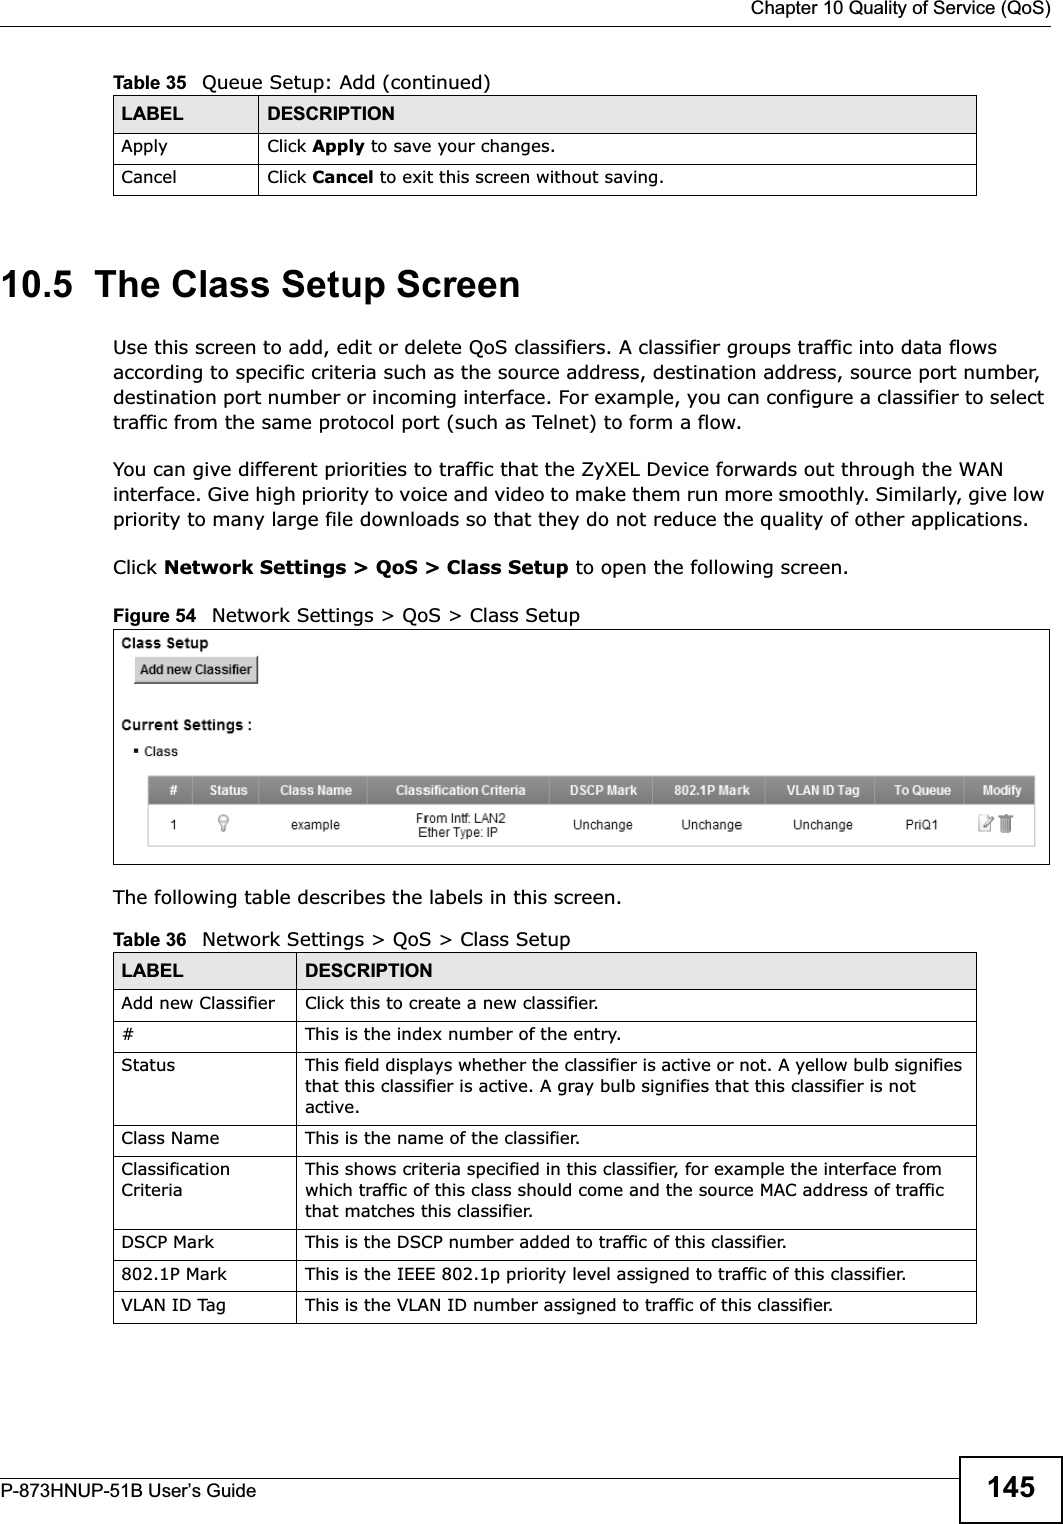  Chapter 10 Quality of Service (QoS)P-873HNUP-51B User’s Guide 14510.5  The Class Setup ScreenUse this screen to add, edit or delete QoS classifiers. A classifier groups traffic into data flows according to specific criteria such as the source address, destination address, source port number, destination port number or incoming interface. For example, you can configure a classifier to select traffic from the same protocol port (such as Telnet) to form a flow.You can give different priorities to traffic that the ZyXEL Device forwards out through the WAN interface. Give high priority to voice and video to make them run more smoothly. Similarly, give low priority to many large file downloads so that they do not reduce the quality of other applications. Click Network Settings &gt; QoS &gt; Class Setup to open the following screen.Figure 54   Network Settings &gt; QoS &gt; Class Setup The following table describes the labels in this screen.  Apply Click Apply to save your changes.Cancel Click Cancel to exit this screen without saving.Table 35   Queue Setup: Add (continued)LABEL DESCRIPTIONTable 36   Network Settings &gt; QoS &gt; Class SetupLABEL DESCRIPTIONAdd new Classifier Click this to create a new classifier.#This is the index number of the entry.Status This field displays whether the classifier is active or not. A yellow bulb signifies that this classifier is active. A gray bulb signifies that this classifier is not active.Class Name This is the name of the classifier.Classification CriteriaThis shows criteria specified in this classifier, for example the interface from which traffic of this class should come and the source MAC address of traffic that matches this classifier.DSCP Mark This is the DSCP number added to traffic of this classifier.802.1P Mark This is the IEEE 802.1p priority level assigned to traffic of this classifier.VLAN ID Tag This is the VLAN ID number assigned to traffic of this classifier.